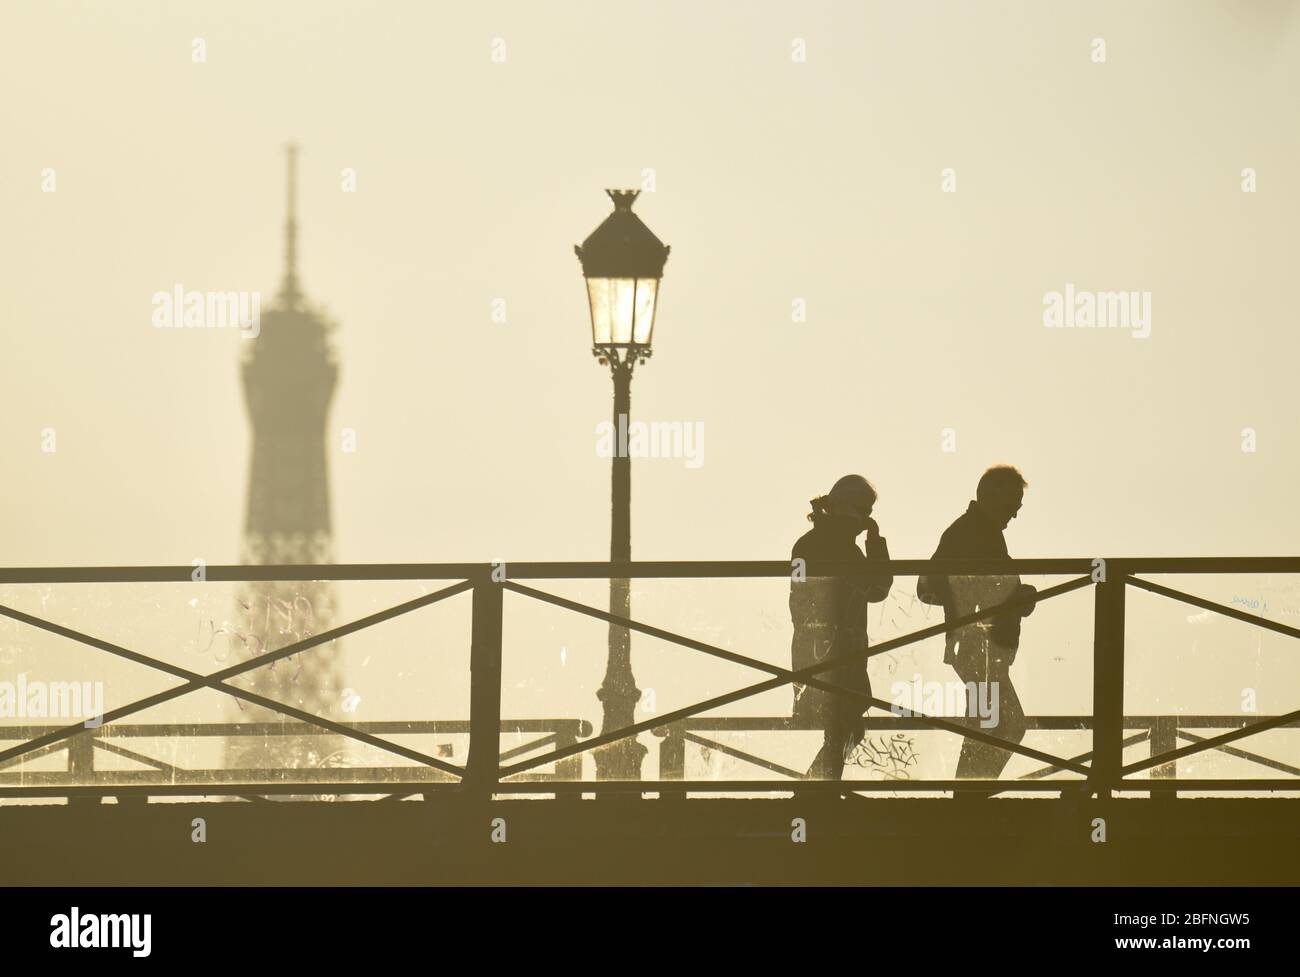 *** STRICTLY NO SALES TO FRENCH MEDIA OR PUBLISHERS - RIGHTS RESERVED *** March 26, 2020 - Paris, France: View on the bridge in foreground to the Eiffel tower, a major tourist landmark, which is completely desert during the lockdown against the spread of coronavirus. Stock Photo